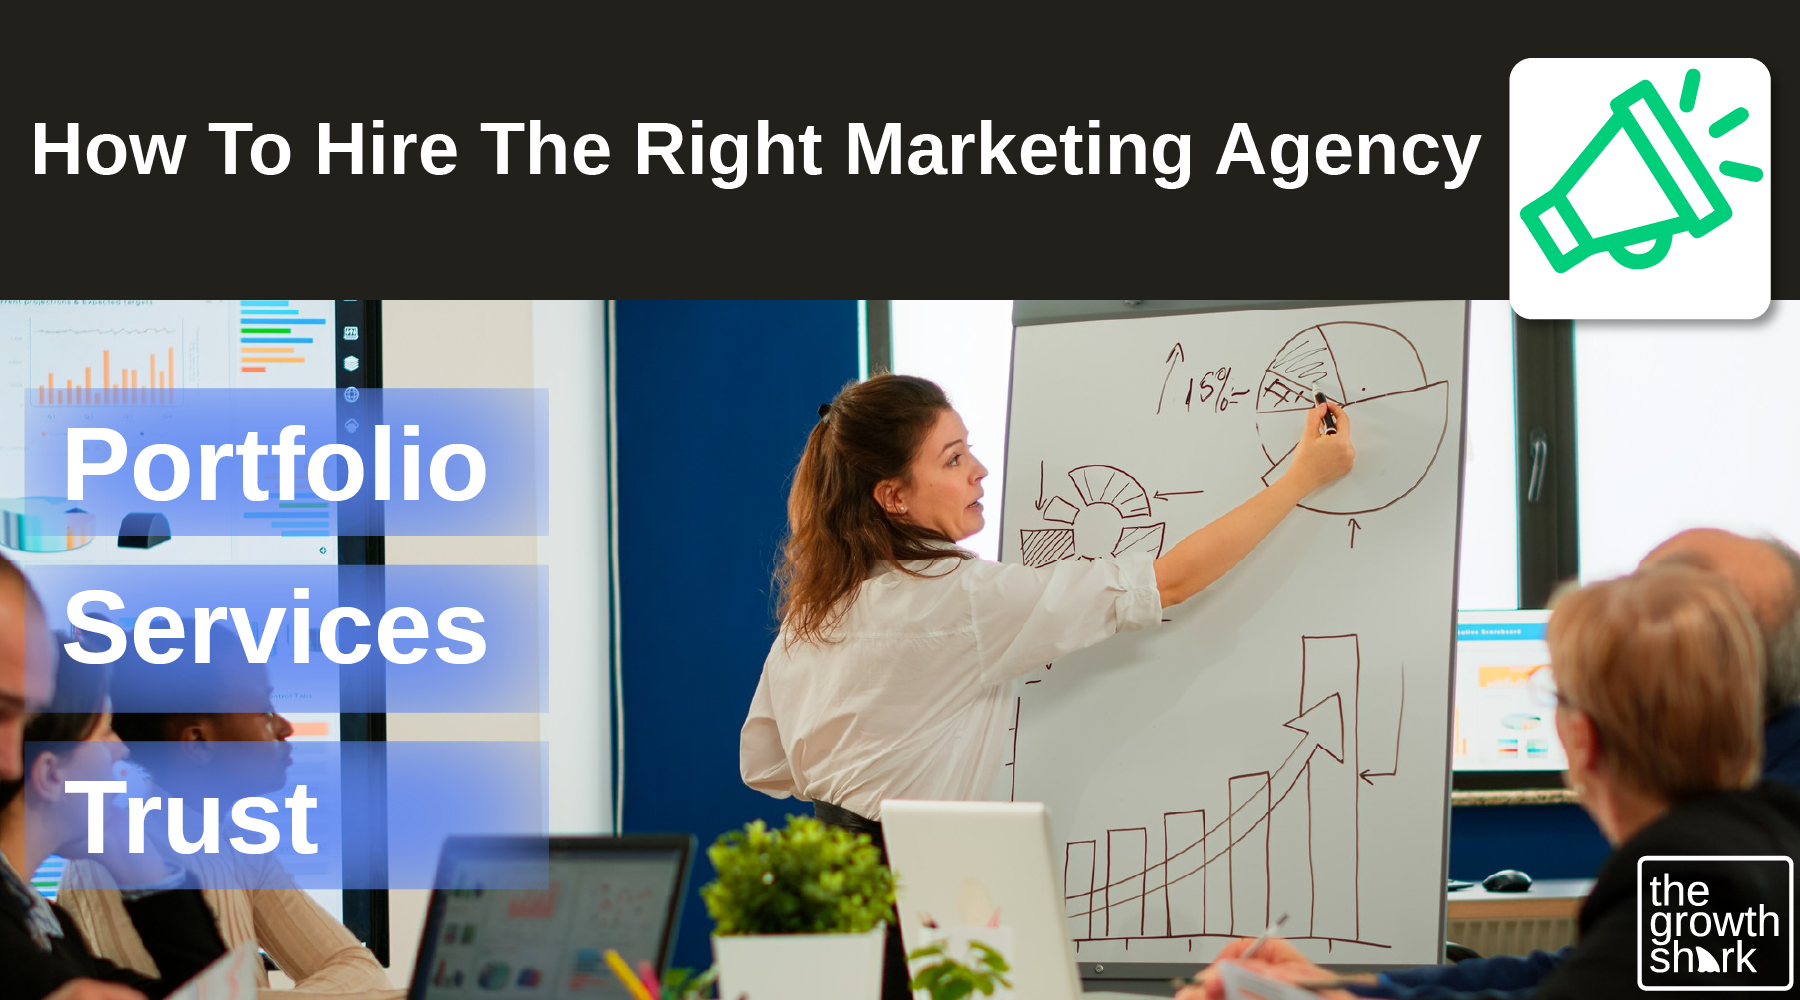 How to hire the right marketing agency for your business